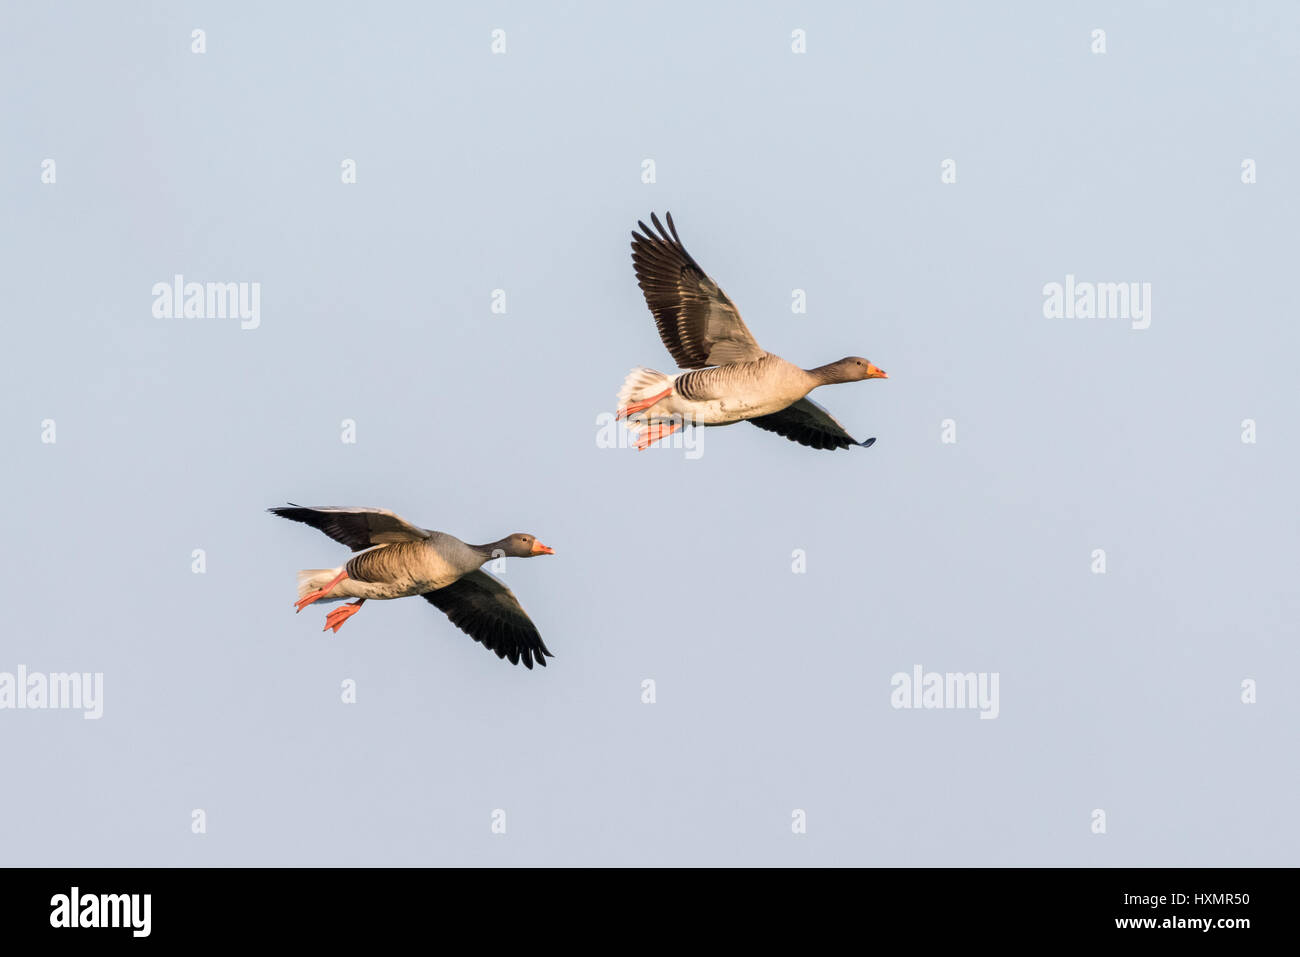 Two greylag geese flying together against a completely blue sky. Stock Photo